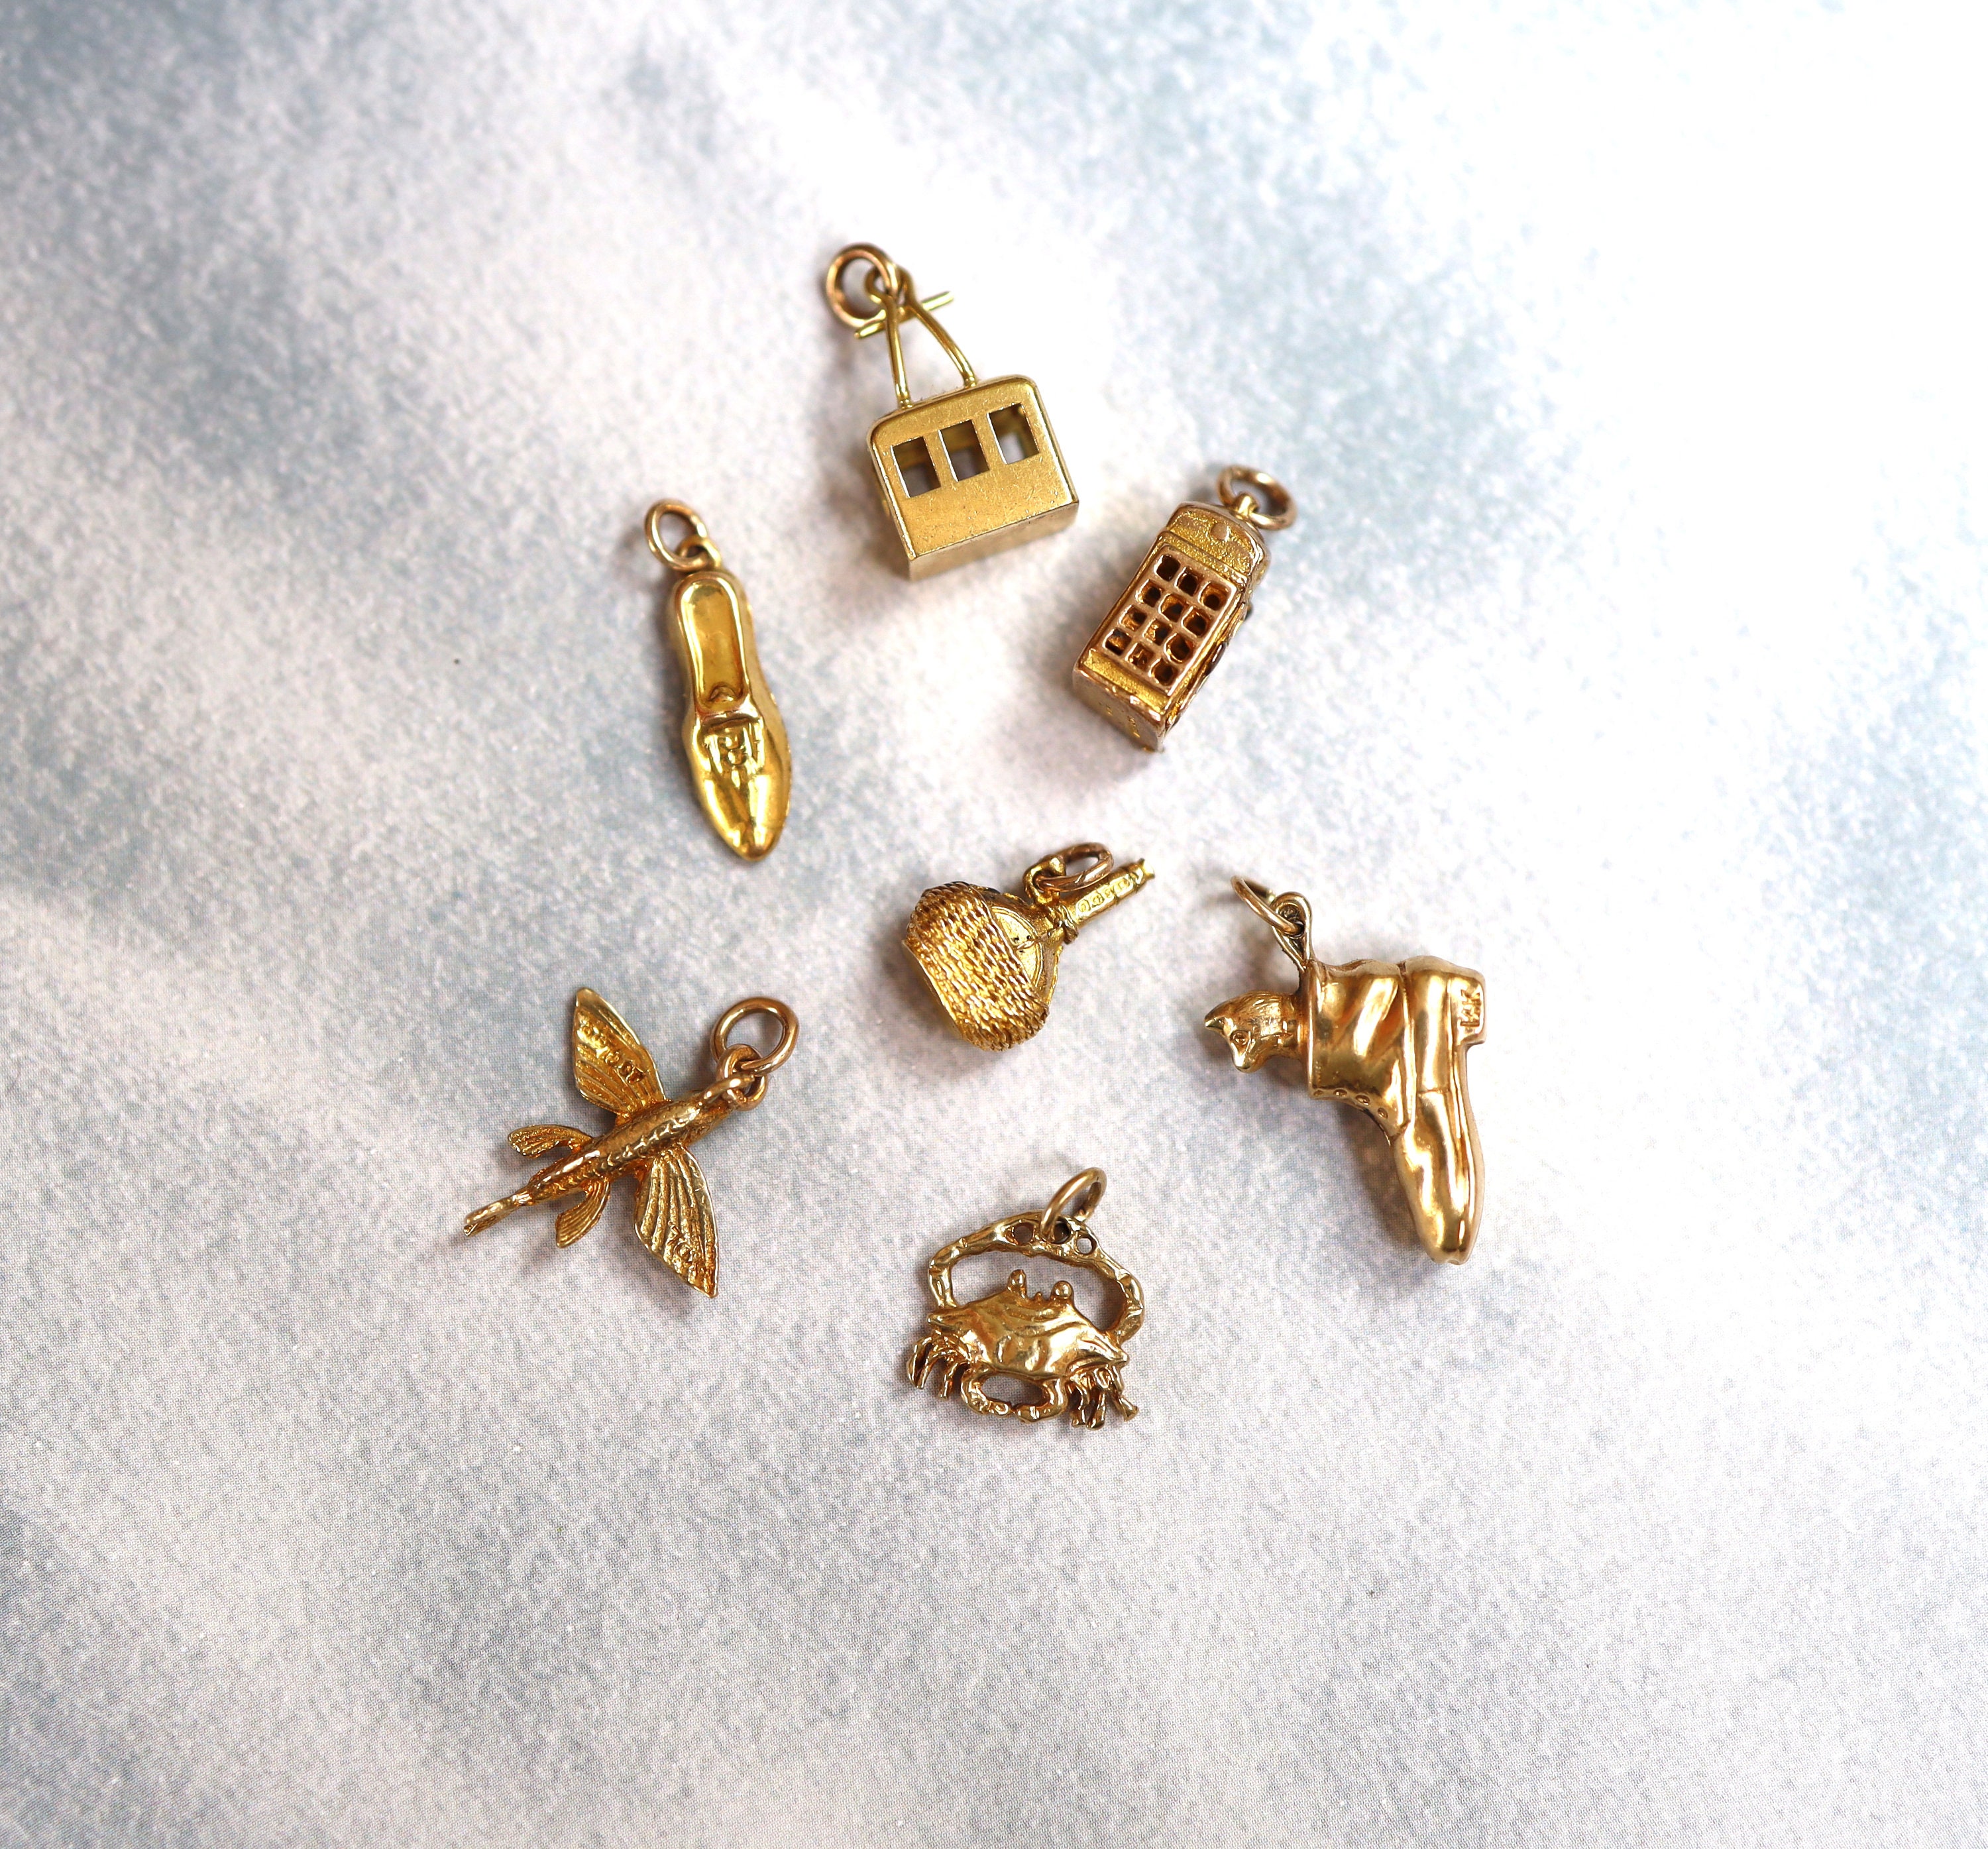 Bulk 100 Assorted Antique Gold Charms, Mixed Charms Jewelry Charms DIY Bracelet Supply